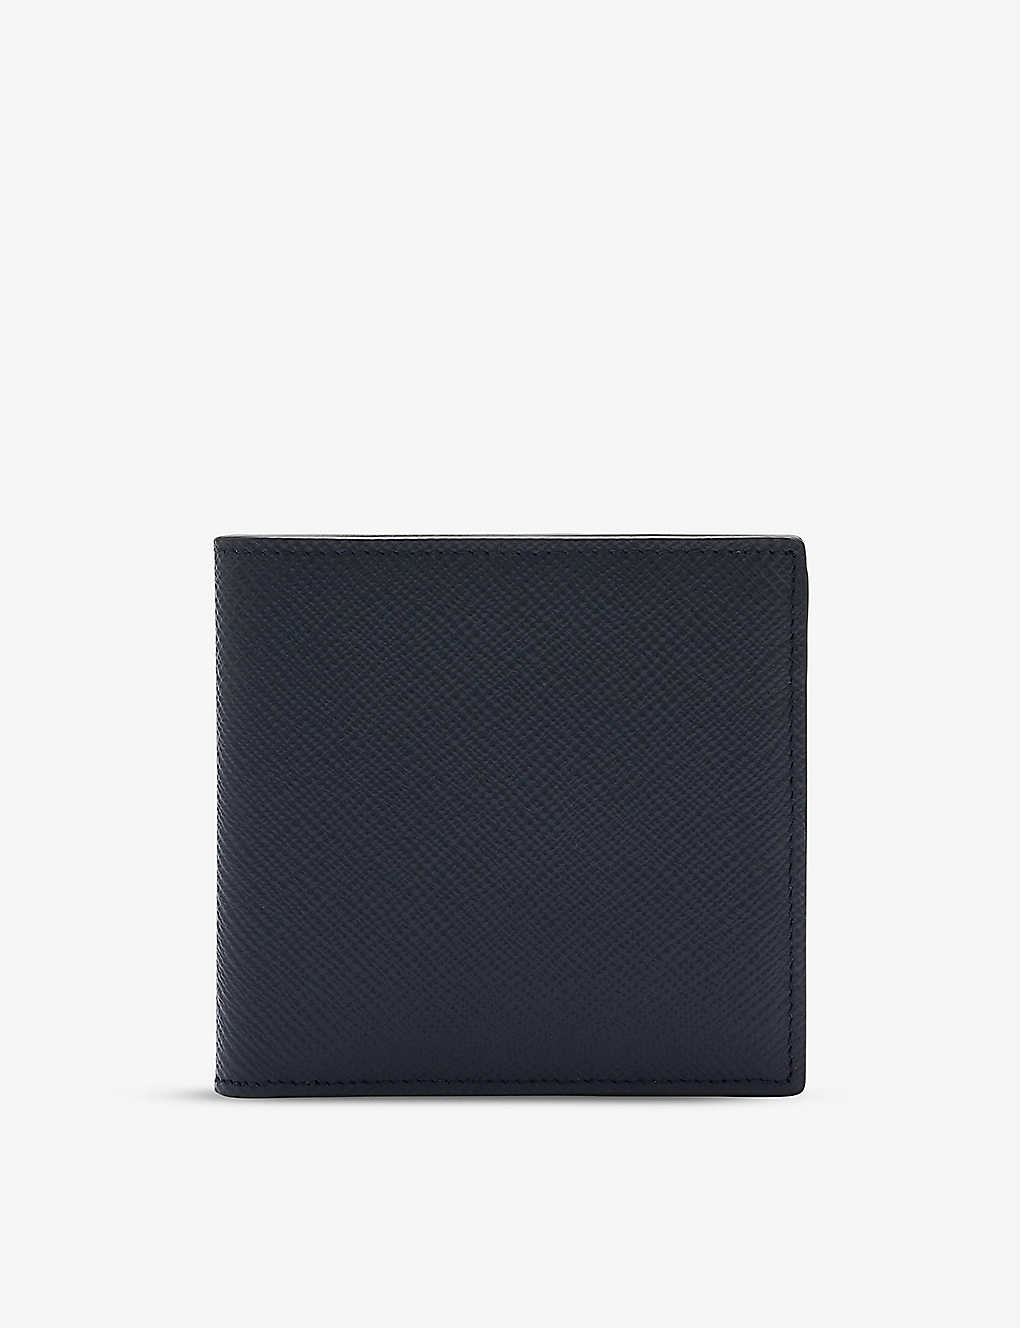 Smythson Panama Grained Leather Wallet In Navy